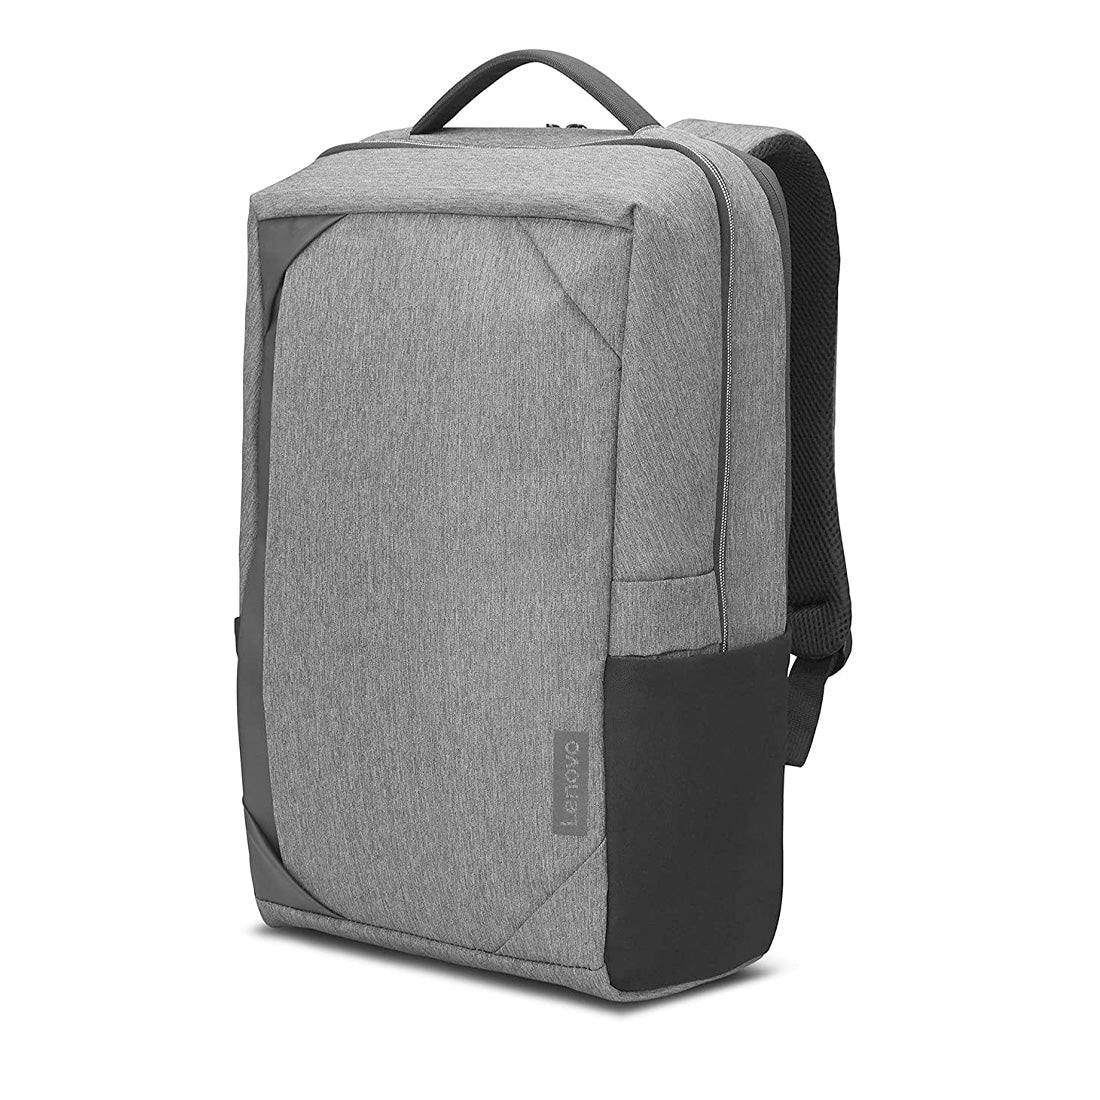 Lenovo Urban Backpack B530 for 15.6-inch Laptops with Water-Repellent Material and Luggage Strap